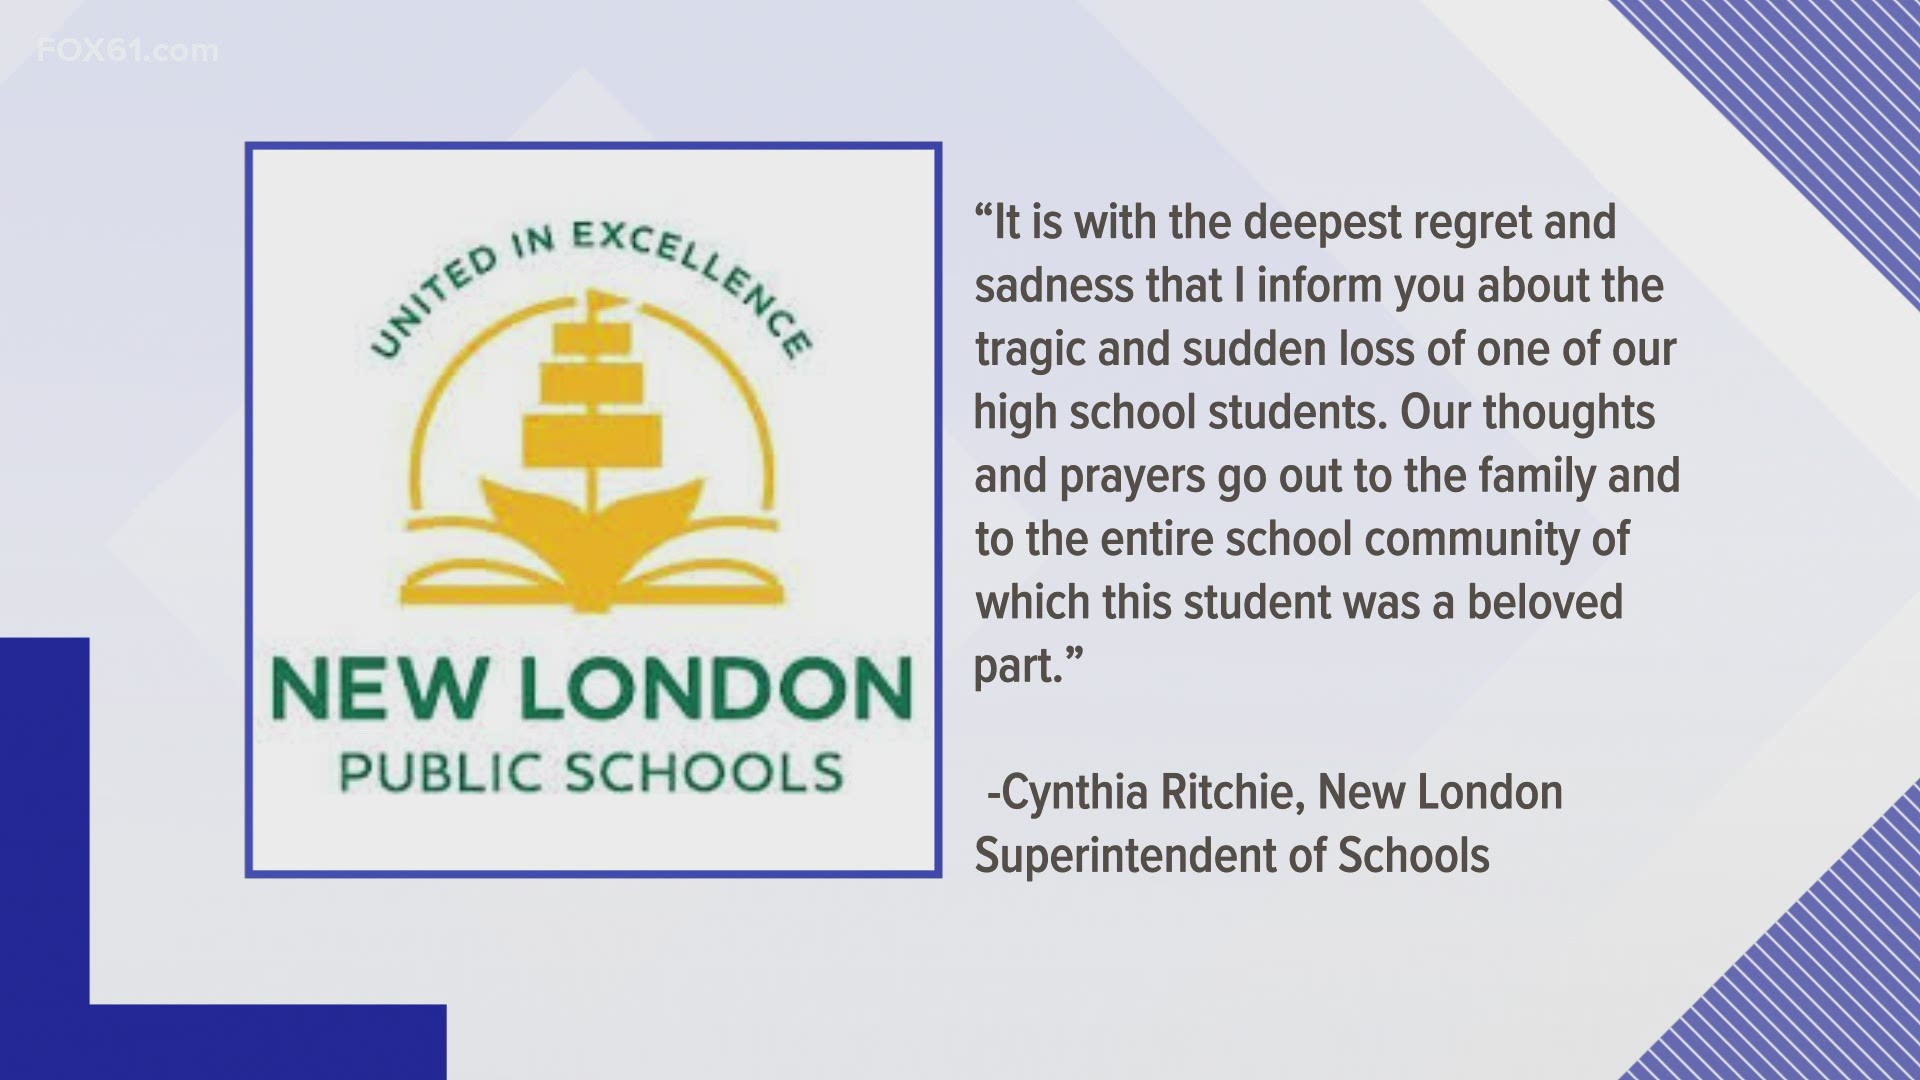 The New London Public Schools superintendent confirmed a 17-year-old high school student was the victim of the shooting.